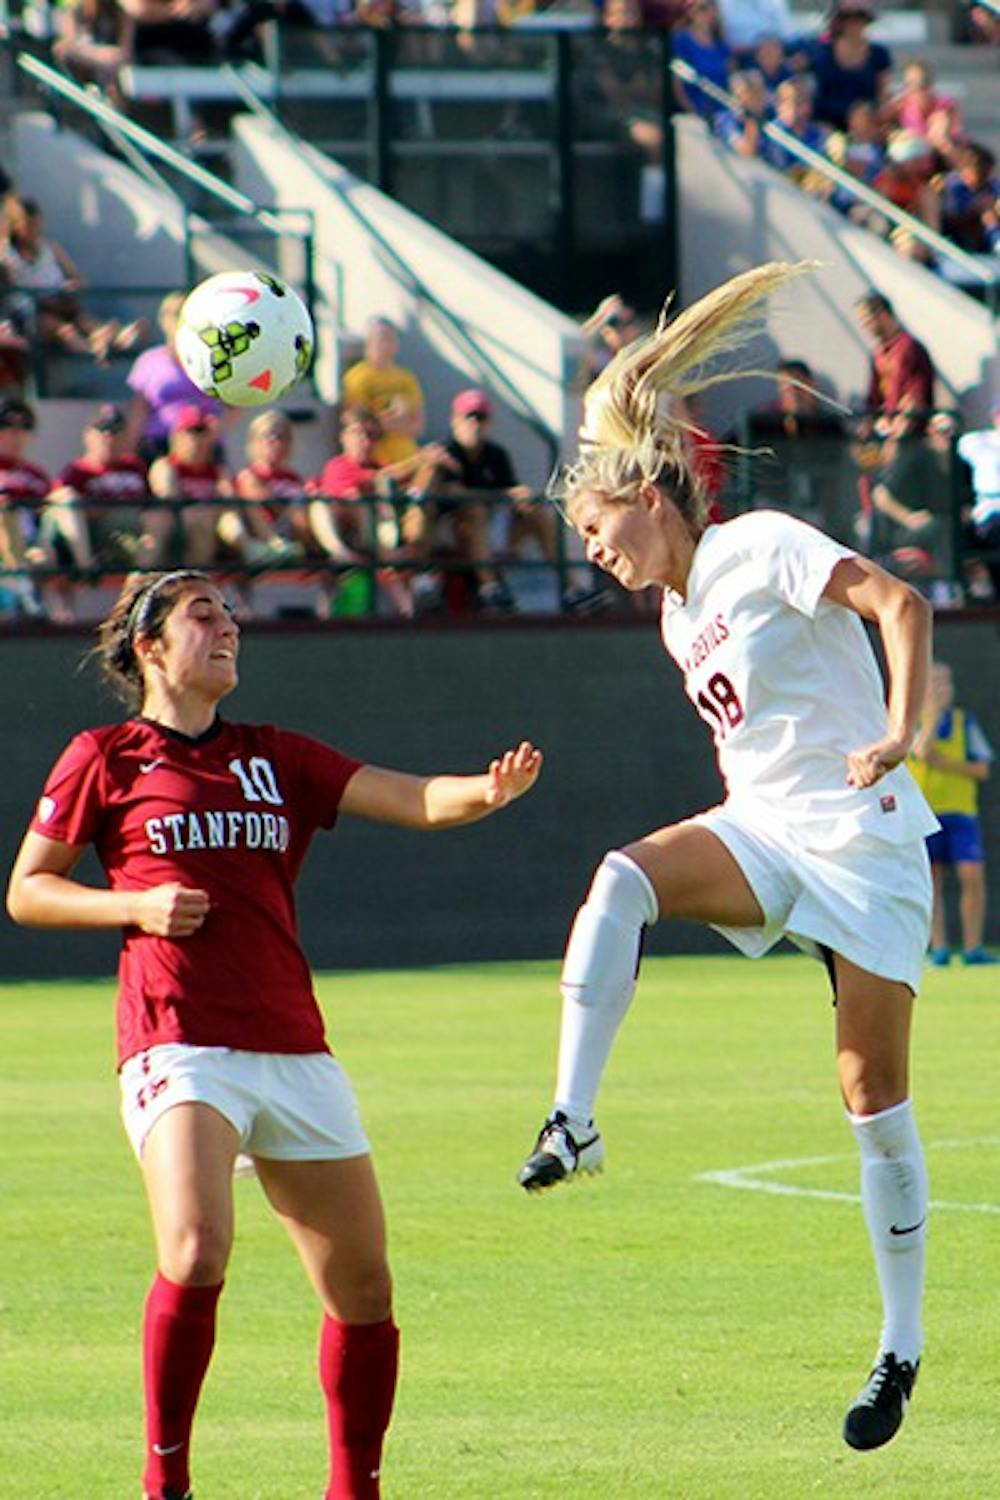 Redshirt junior forward Mackenzie Semerad heads the ball against a Stanford defender in a home game on Sunday, Oct. 26, 2014. Stanford won the game 2-0. (Photo by Sawyer Hardebeck)